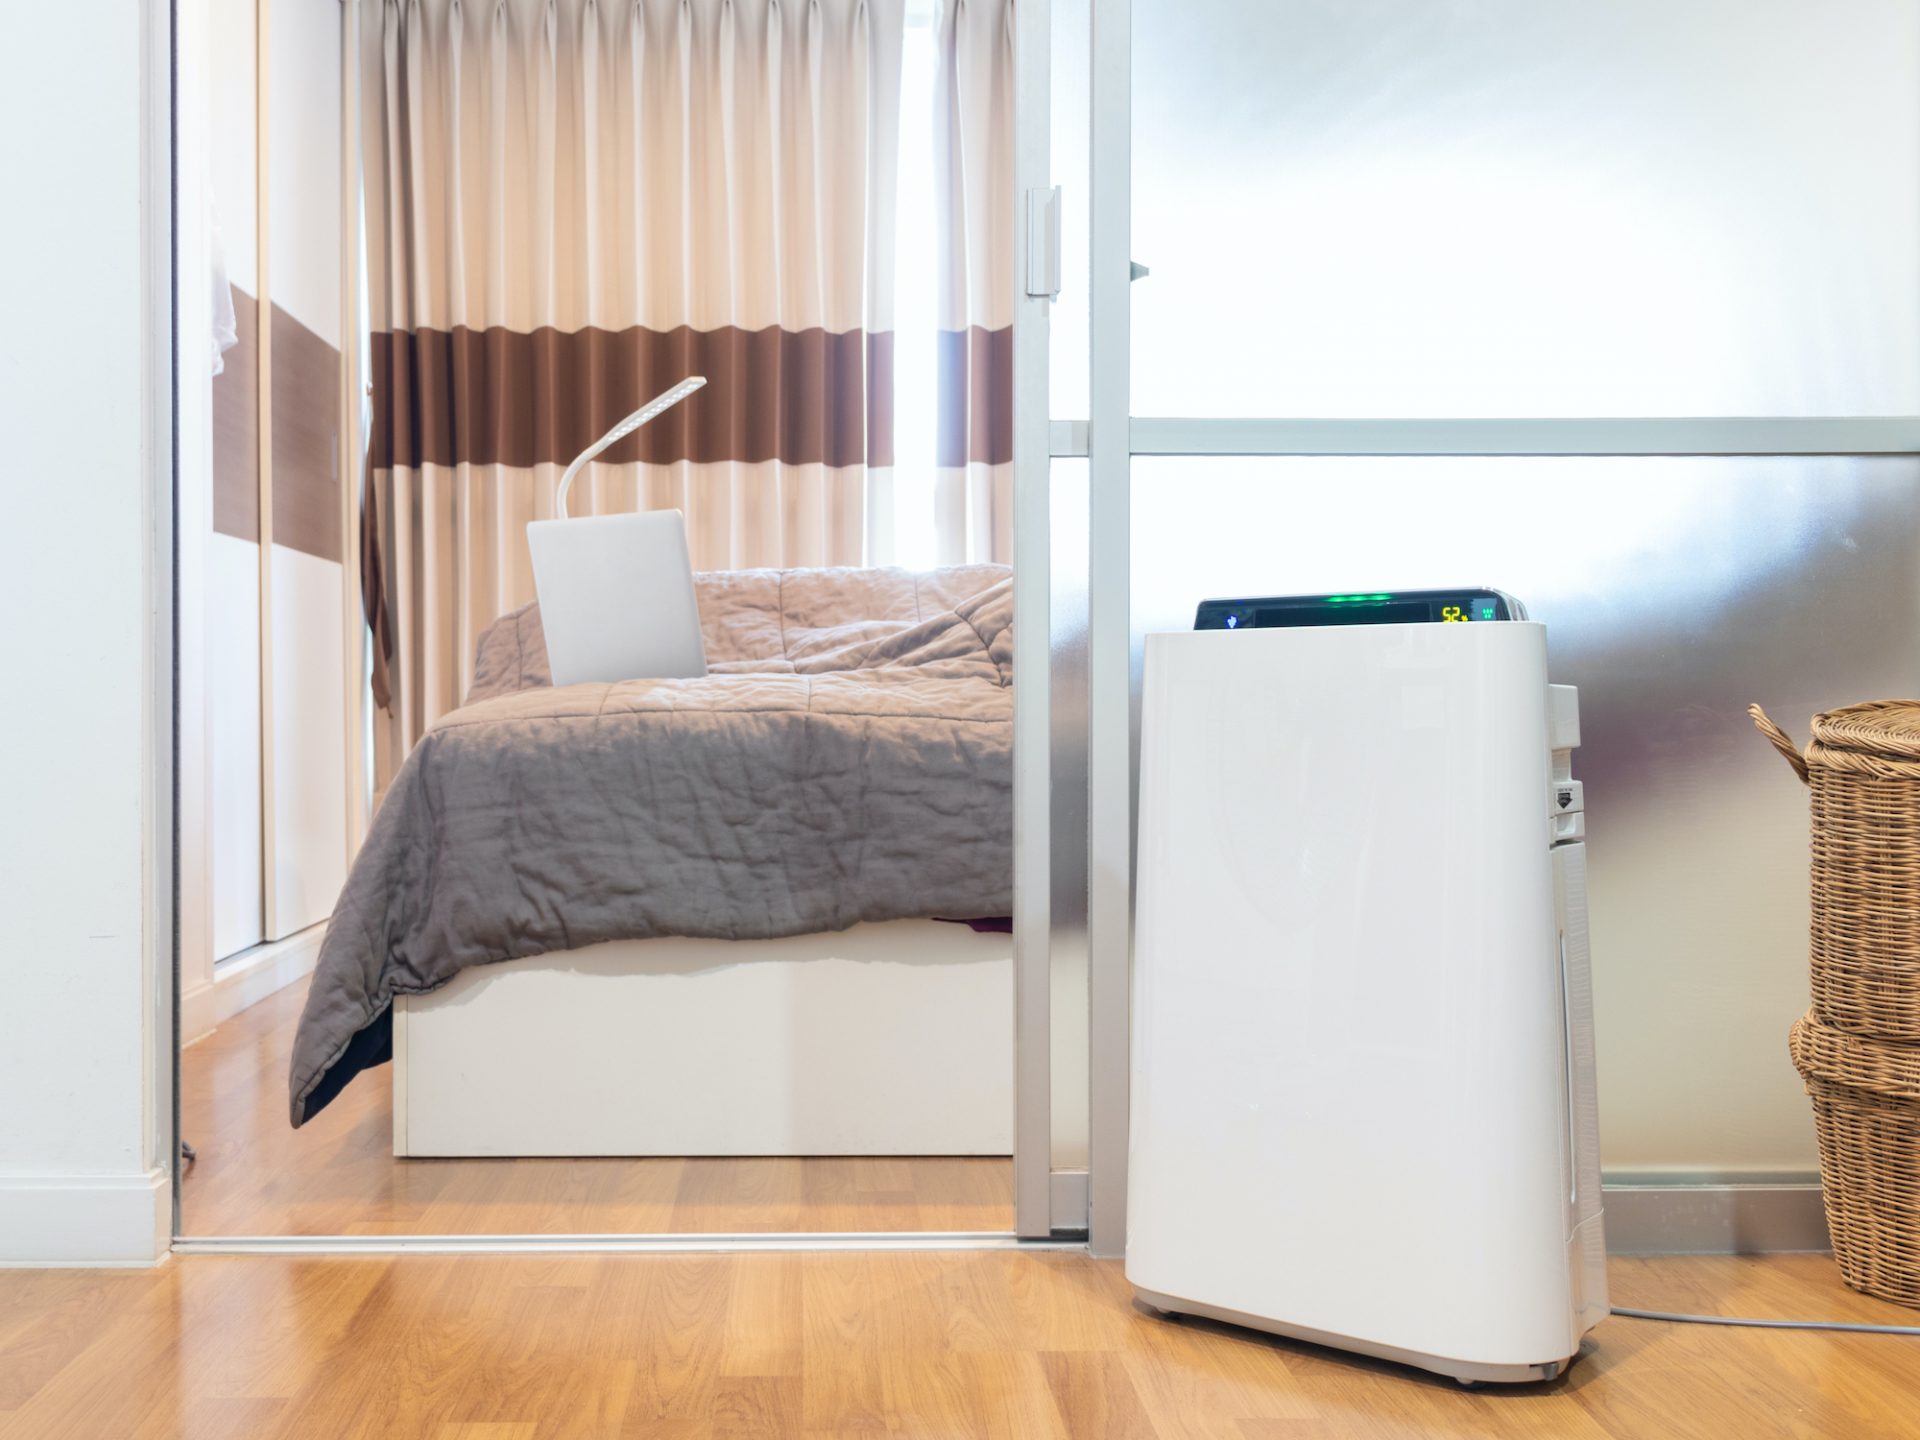 Study: Indoor air cleaners fall short on removing volatile organic compounds